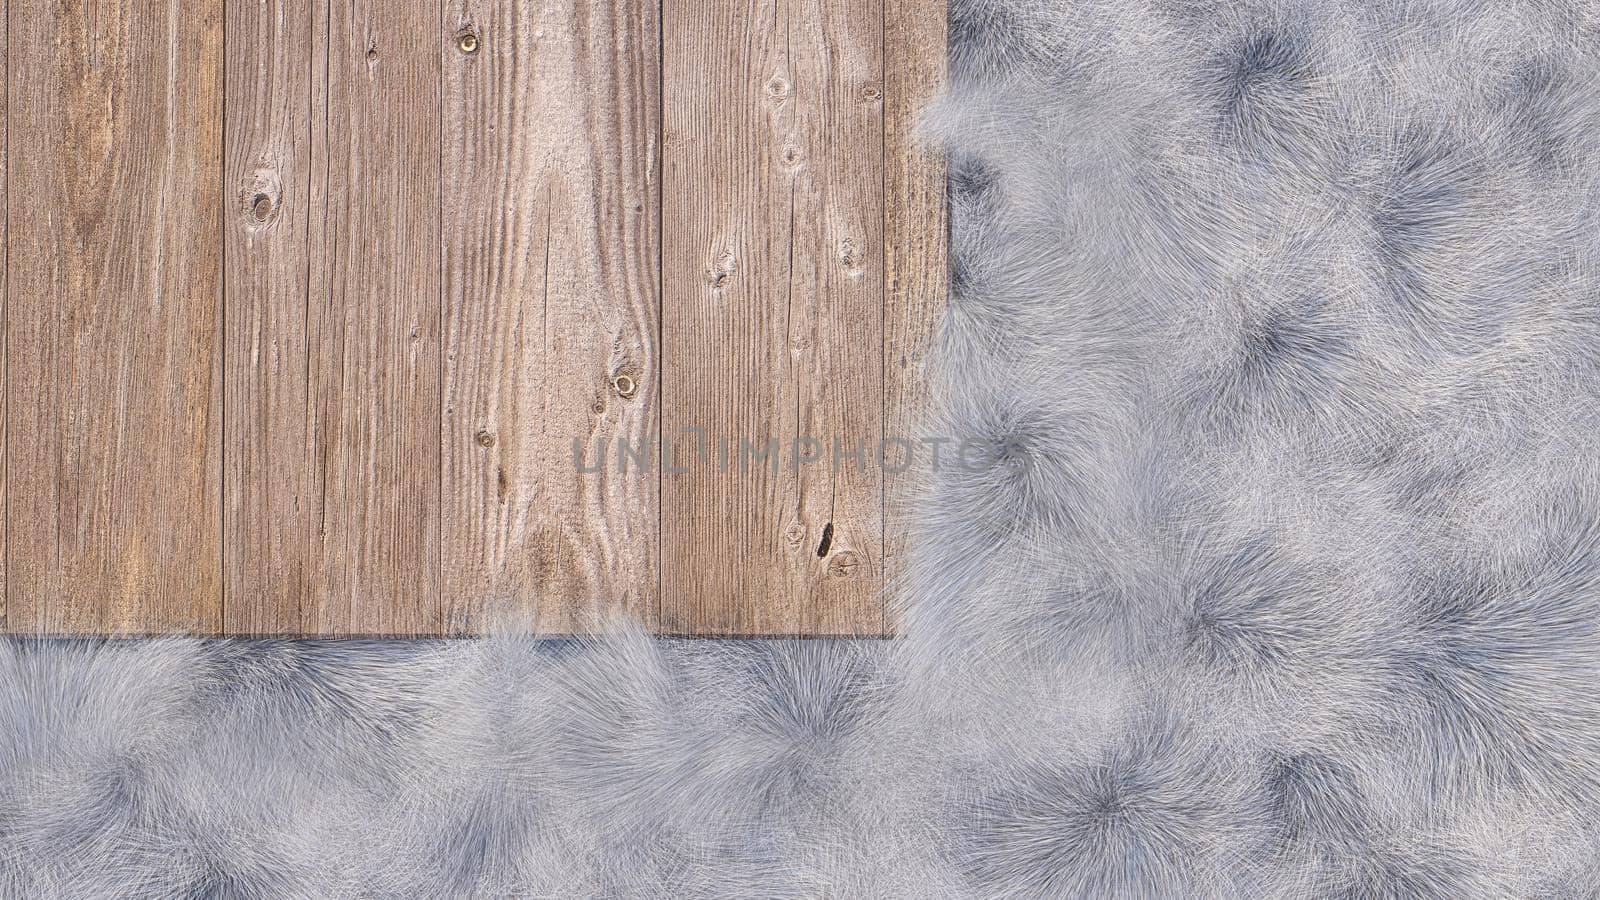 A 3d rendering image of wooden plate place on white fur.